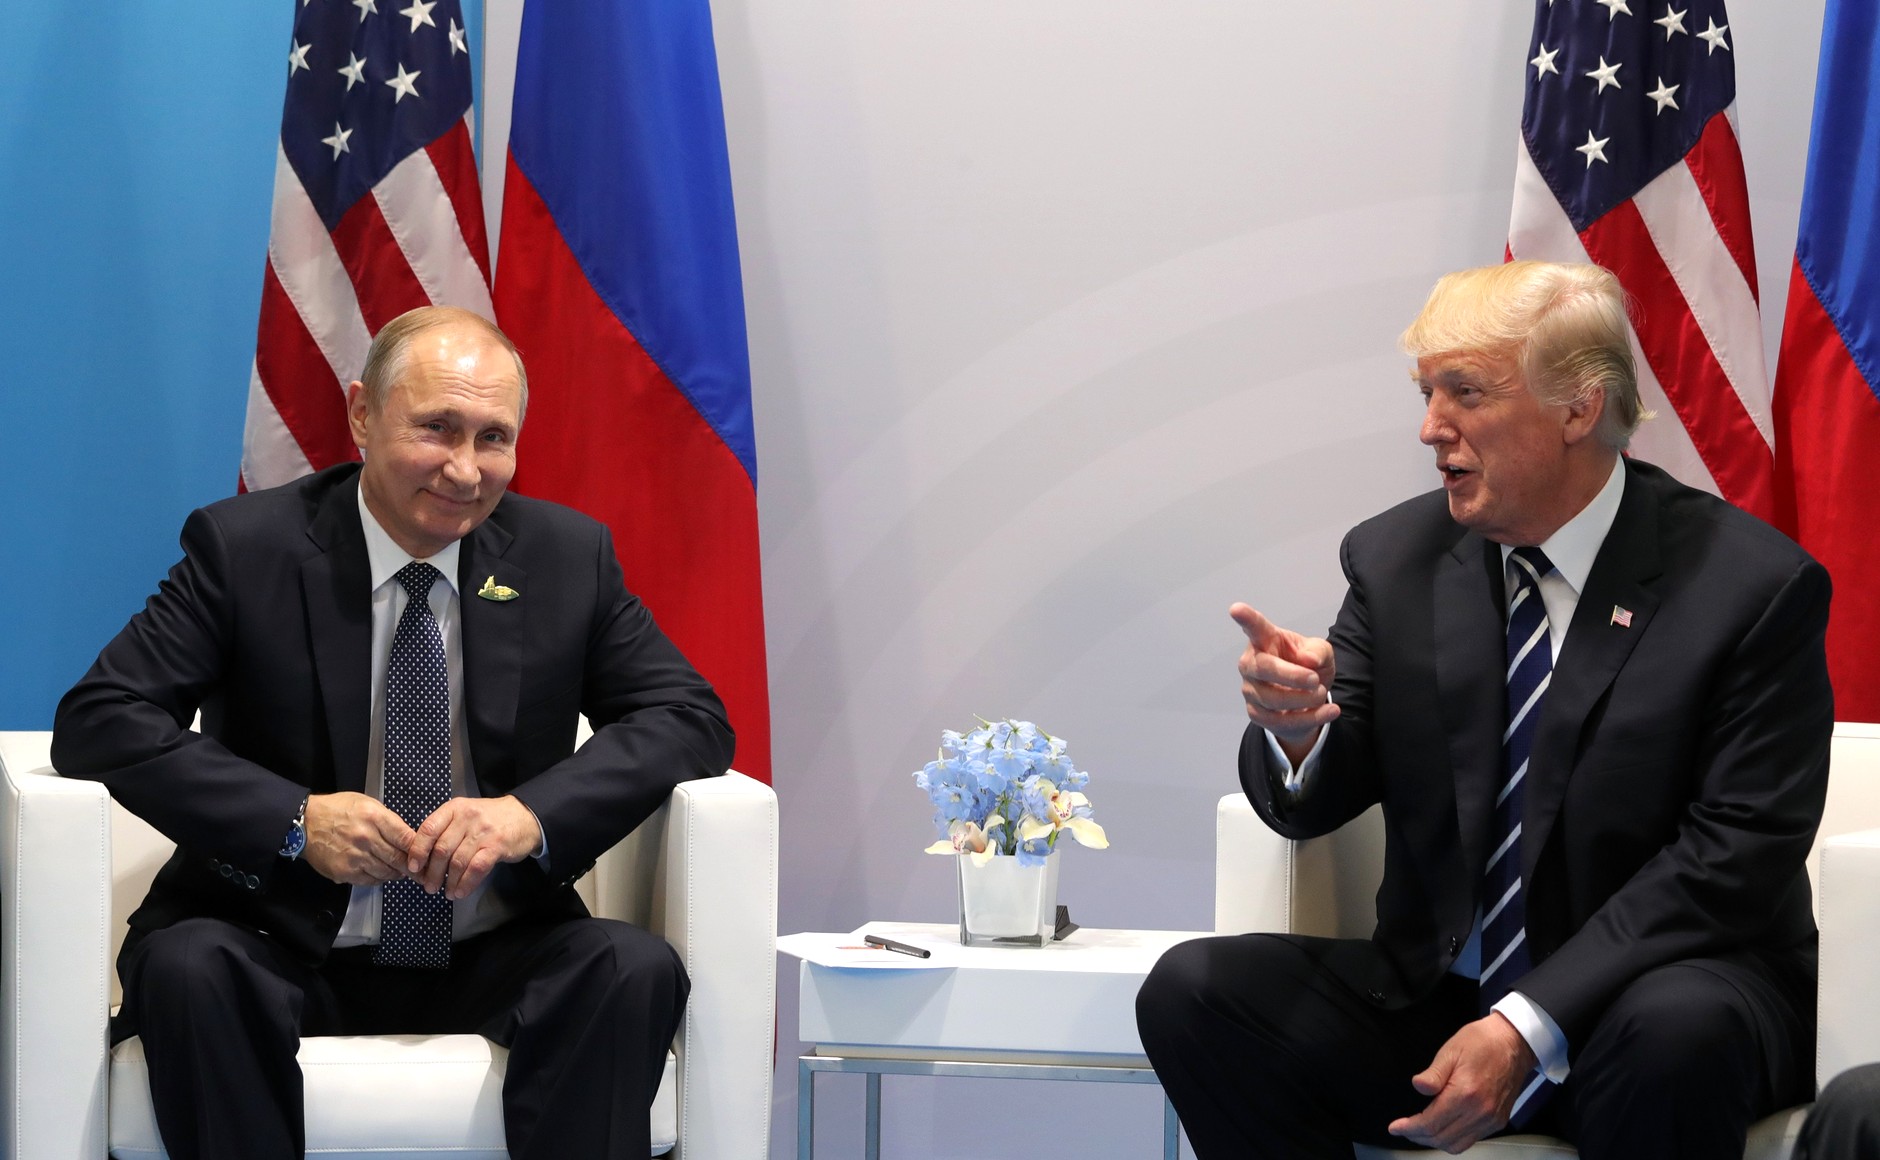 Resetting the Reset: Looking Back at the Cycle of U.S.-Russia Relations